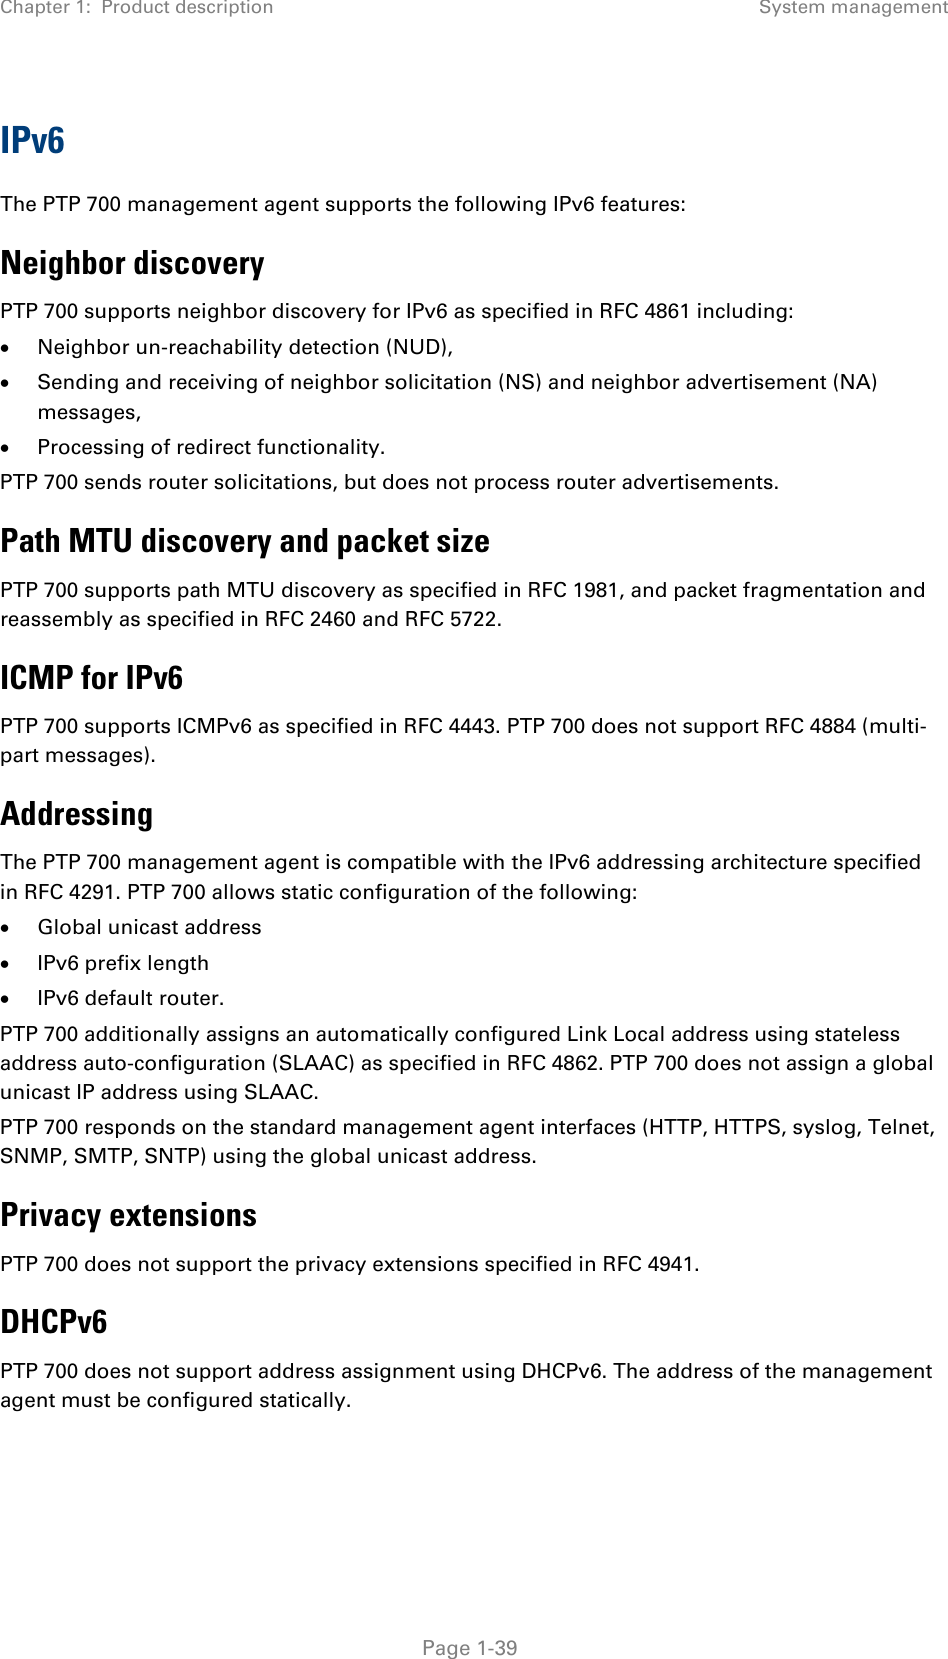 Chapter 1:  Product description System management  IPv6 The PTP 700 management agent supports the following IPv6 features: Neighbor discovery PTP 700 supports neighbor discovery for IPv6 as specified in RFC 4861 including: • Neighbor un-reachability detection (NUD), • Sending and receiving of neighbor solicitation (NS) and neighbor advertisement (NA) messages, • Processing of redirect functionality. PTP 700 sends router solicitations, but does not process router advertisements. Path MTU discovery and packet size PTP 700 supports path MTU discovery as specified in RFC 1981, and packet fragmentation and reassembly as specified in RFC 2460 and RFC 5722. ICMP for IPv6 PTP 700 supports ICMPv6 as specified in RFC 4443. PTP 700 does not support RFC 4884 (multi-part messages). Addressing The PTP 700 management agent is compatible with the IPv6 addressing architecture specified in RFC 4291. PTP 700 allows static configuration of the following: • Global unicast address • IPv6 prefix length • IPv6 default router. PTP 700 additionally assigns an automatically configured Link Local address using stateless address auto-configuration (SLAAC) as specified in RFC 4862. PTP 700 does not assign a global unicast IP address using SLAAC. PTP 700 responds on the standard management agent interfaces (HTTP, HTTPS, syslog, Telnet, SNMP, SMTP, SNTP) using the global unicast address. Privacy extensions PTP 700 does not support the privacy extensions specified in RFC 4941. DHCPv6 PTP 700 does not support address assignment using DHCPv6. The address of the management agent must be configured statically.  Page 1-39 